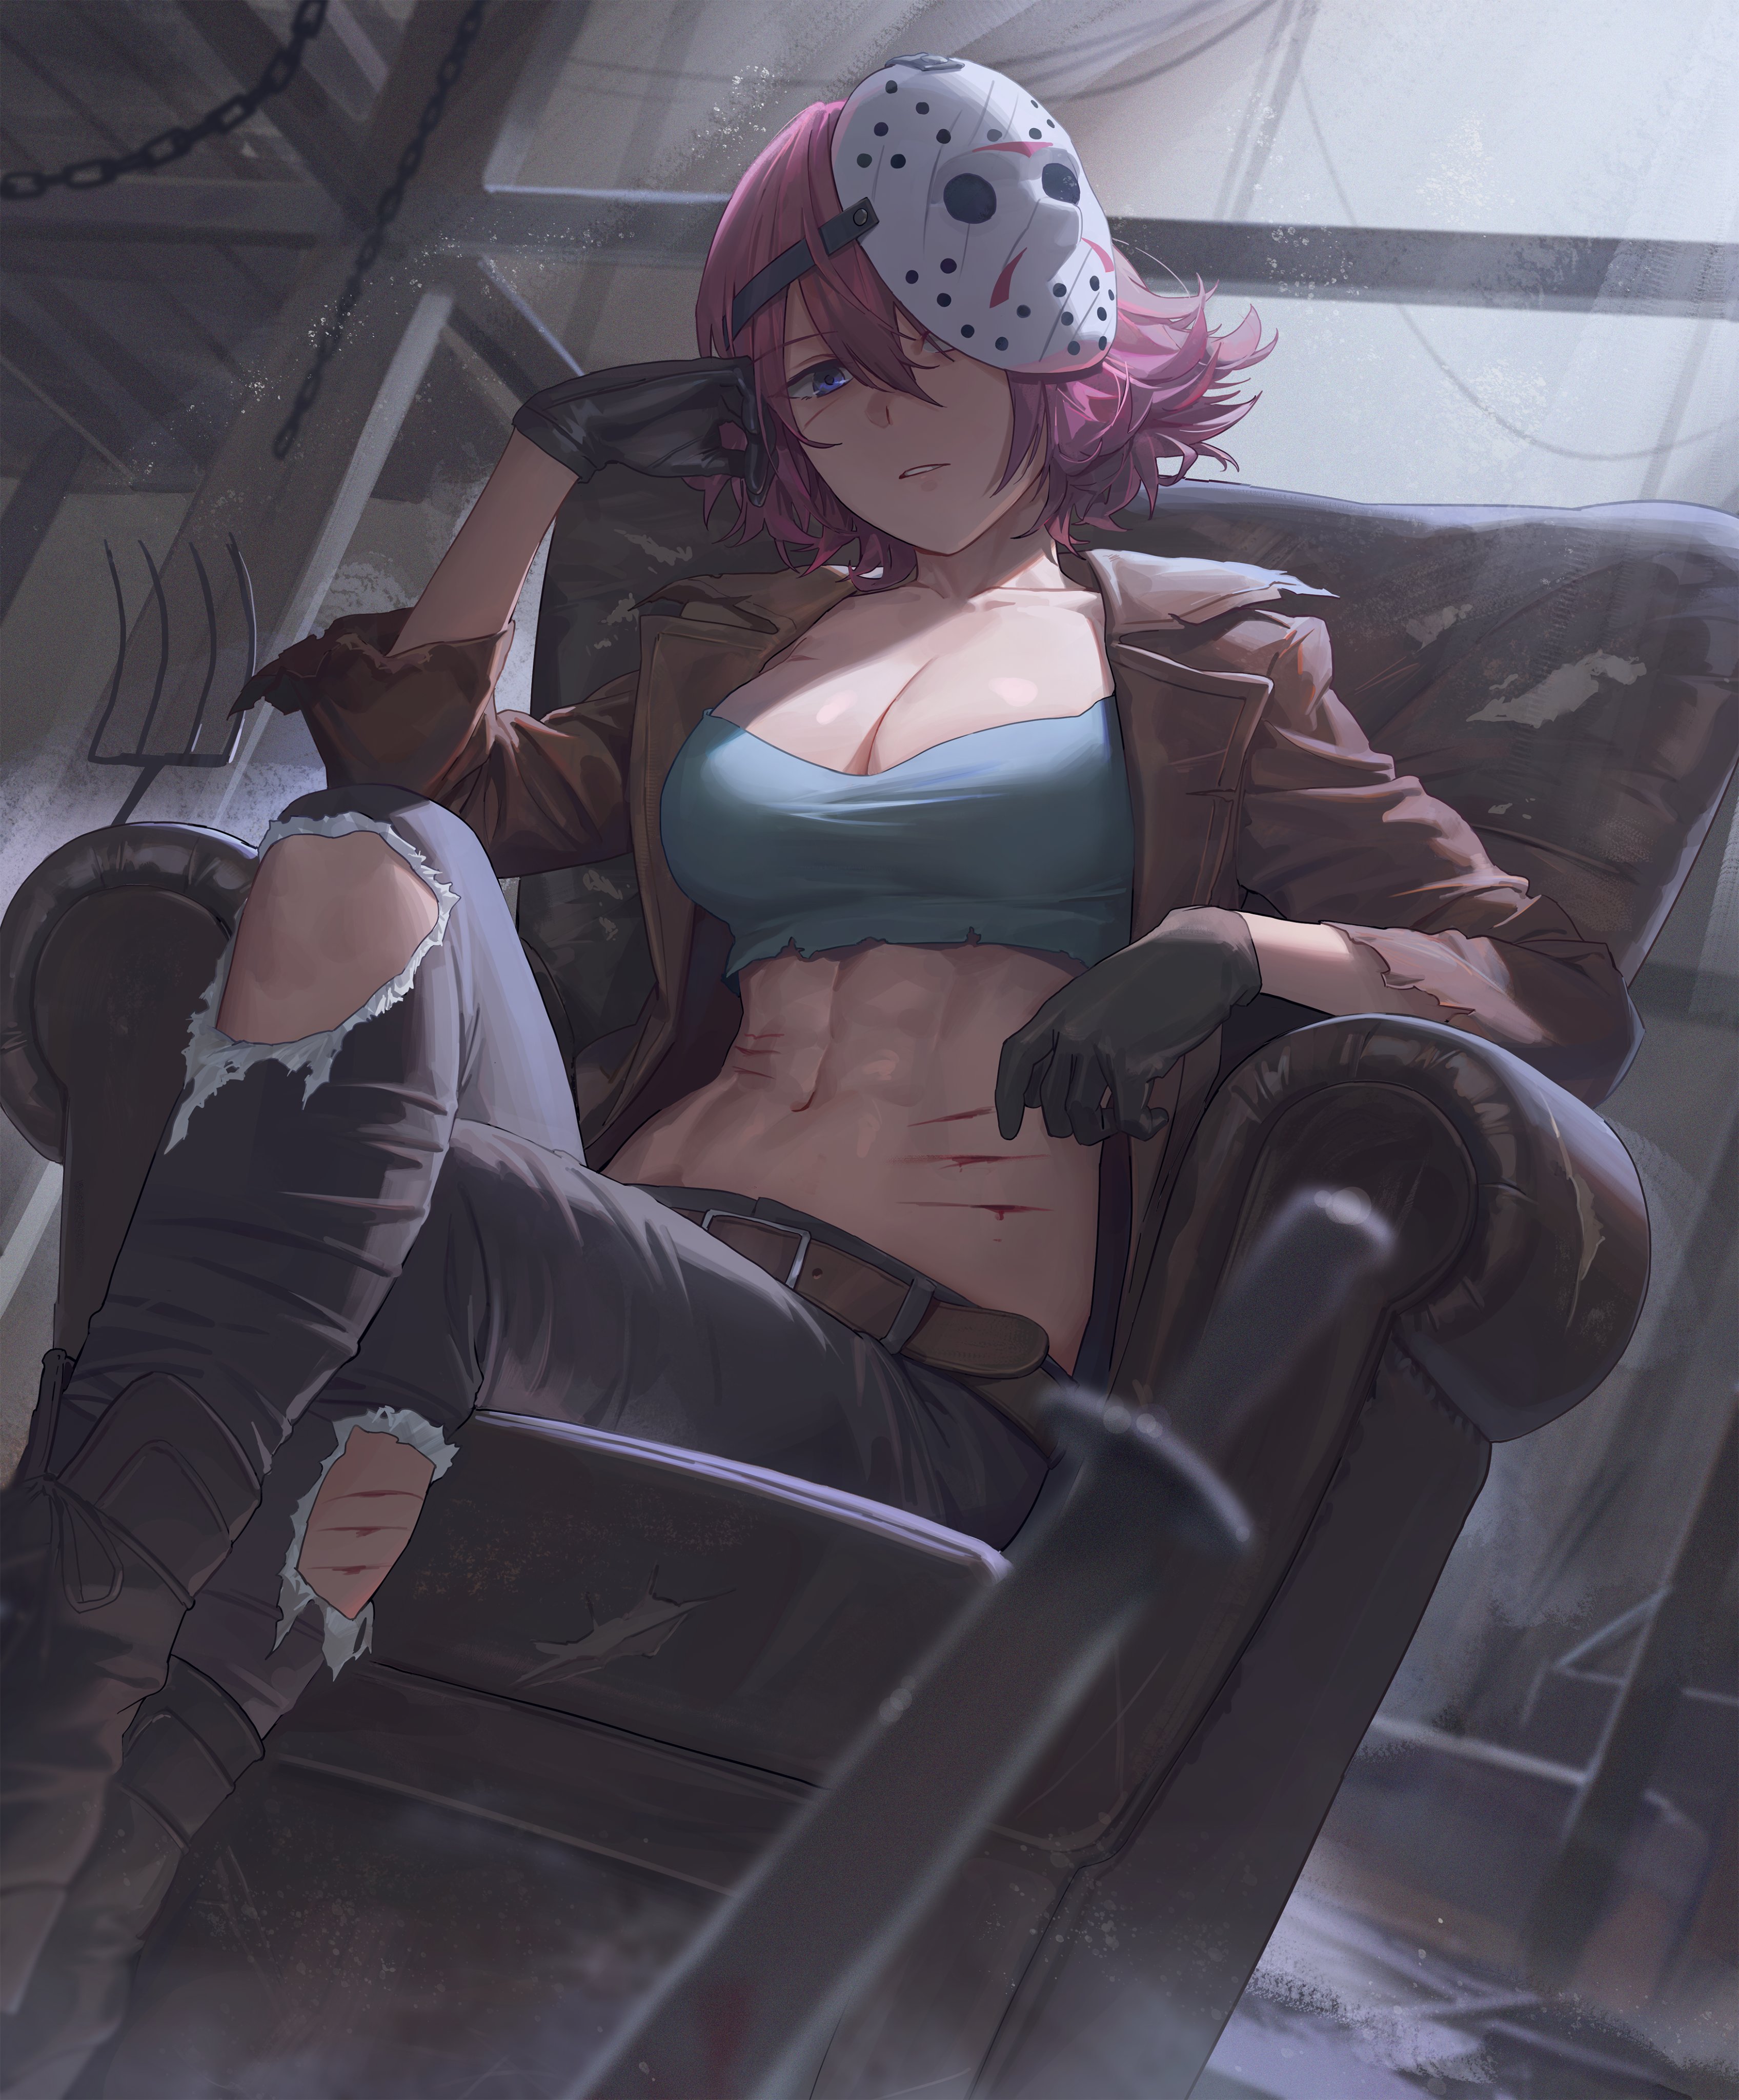 Anime 3392x4096 anime anime girls Yohan1754 artwork Friday the 13th mask cleavage belly blades